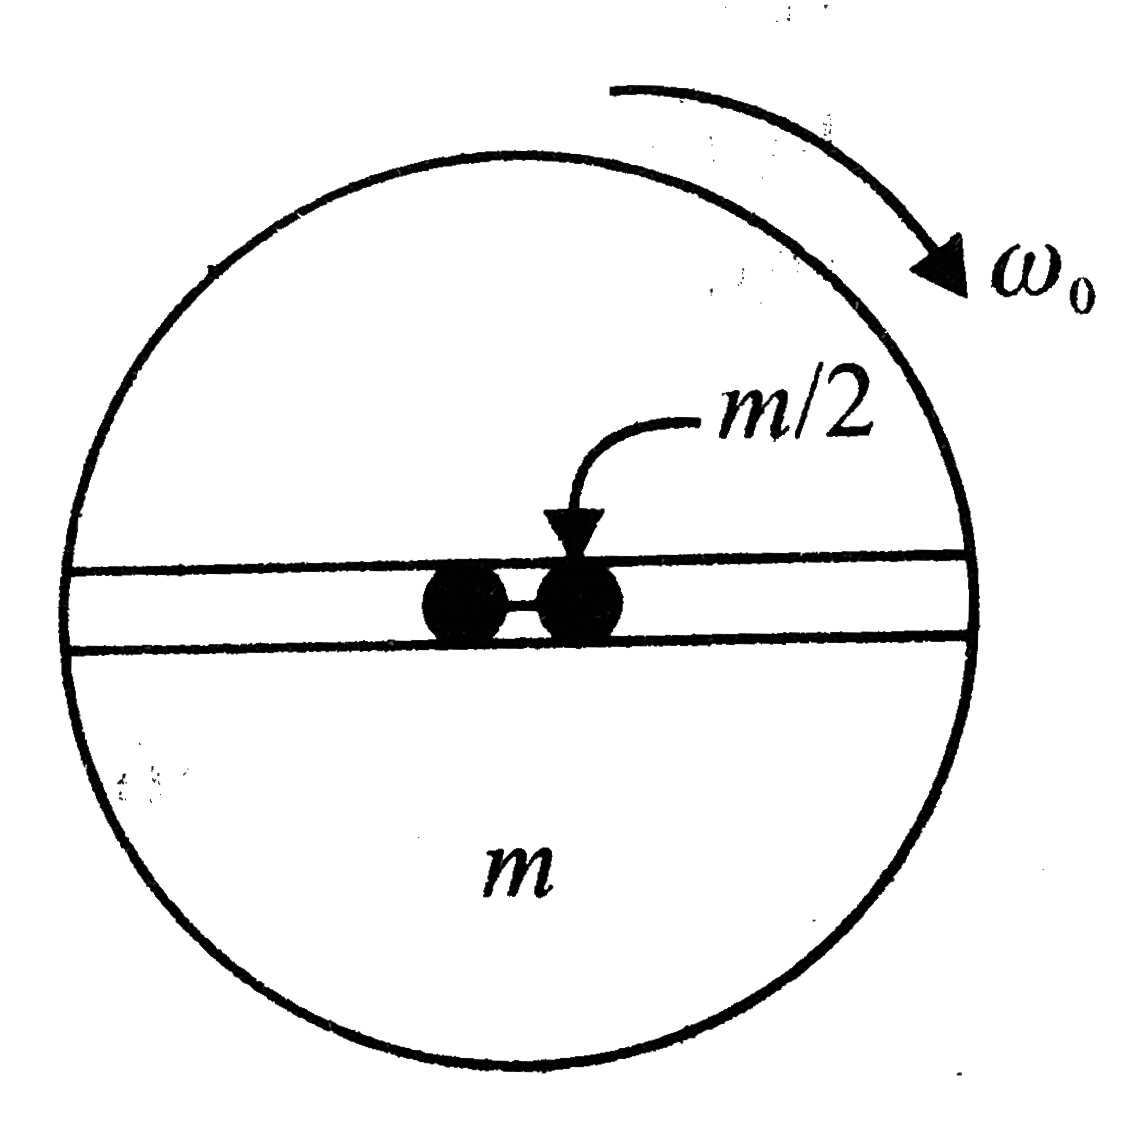 A disc of mass m and radius R is free to rotate in a horizontal plane about a vertical smooth fixed axis passing through its centre. There is a smooth groove along the diameter of the disc and two small balls of mass m//2 each are placed in it on either side of the centre of the disc as shown in Fig. The disc is given an initial angular velocity omega(0) and released.        The speed of each ball relative to the ground just after they leave the disc is